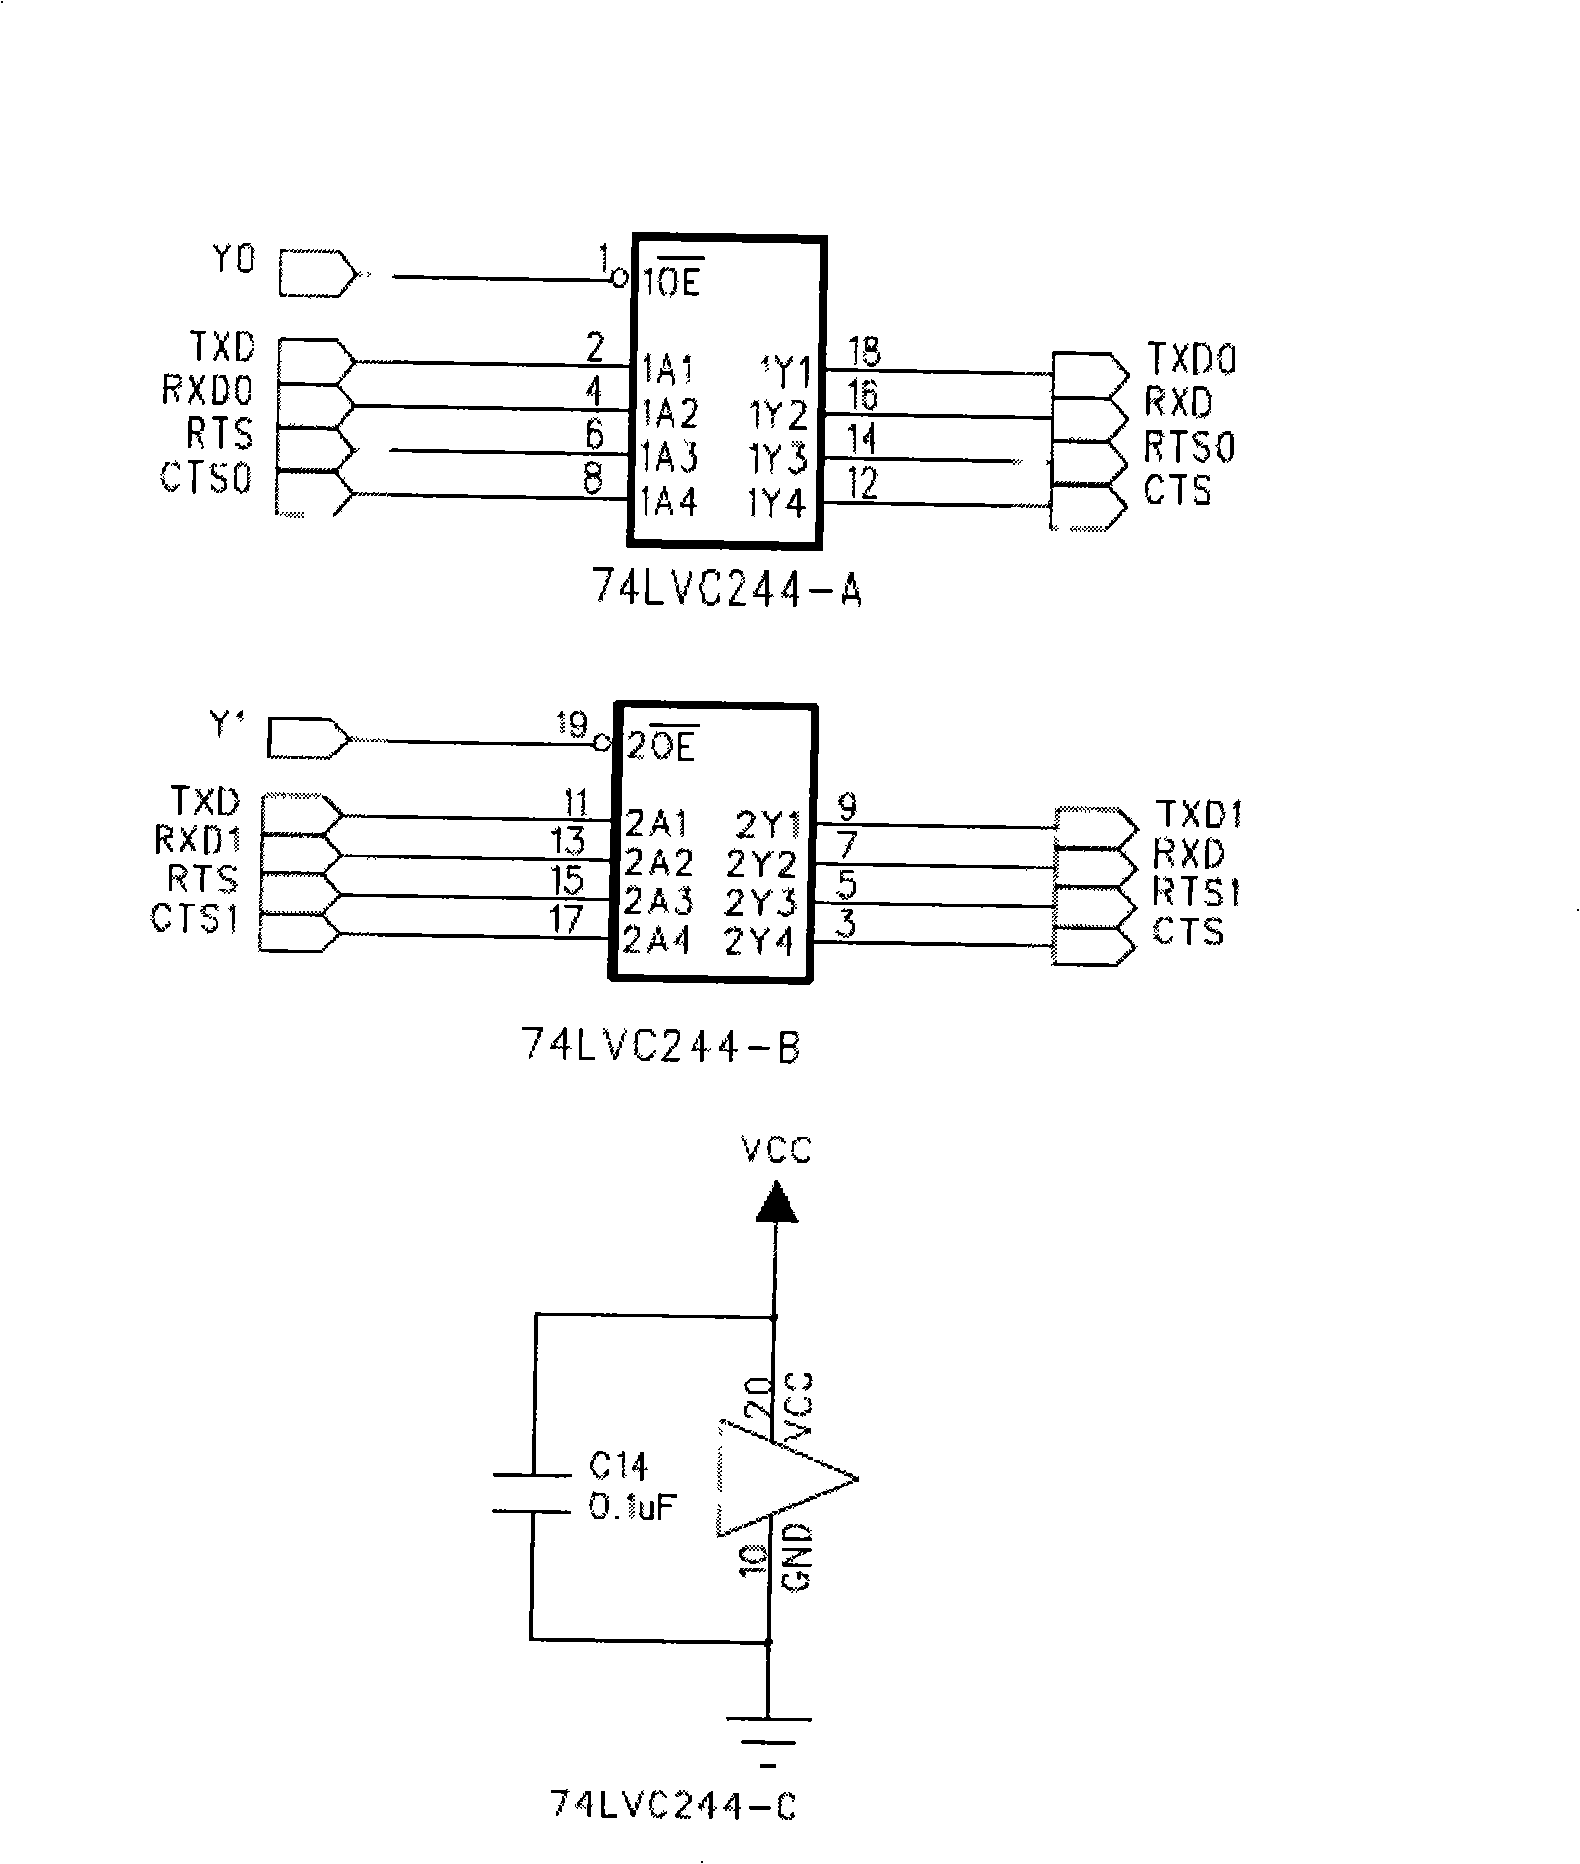 Method and apparatus for expanding multiple serial ports of terminal